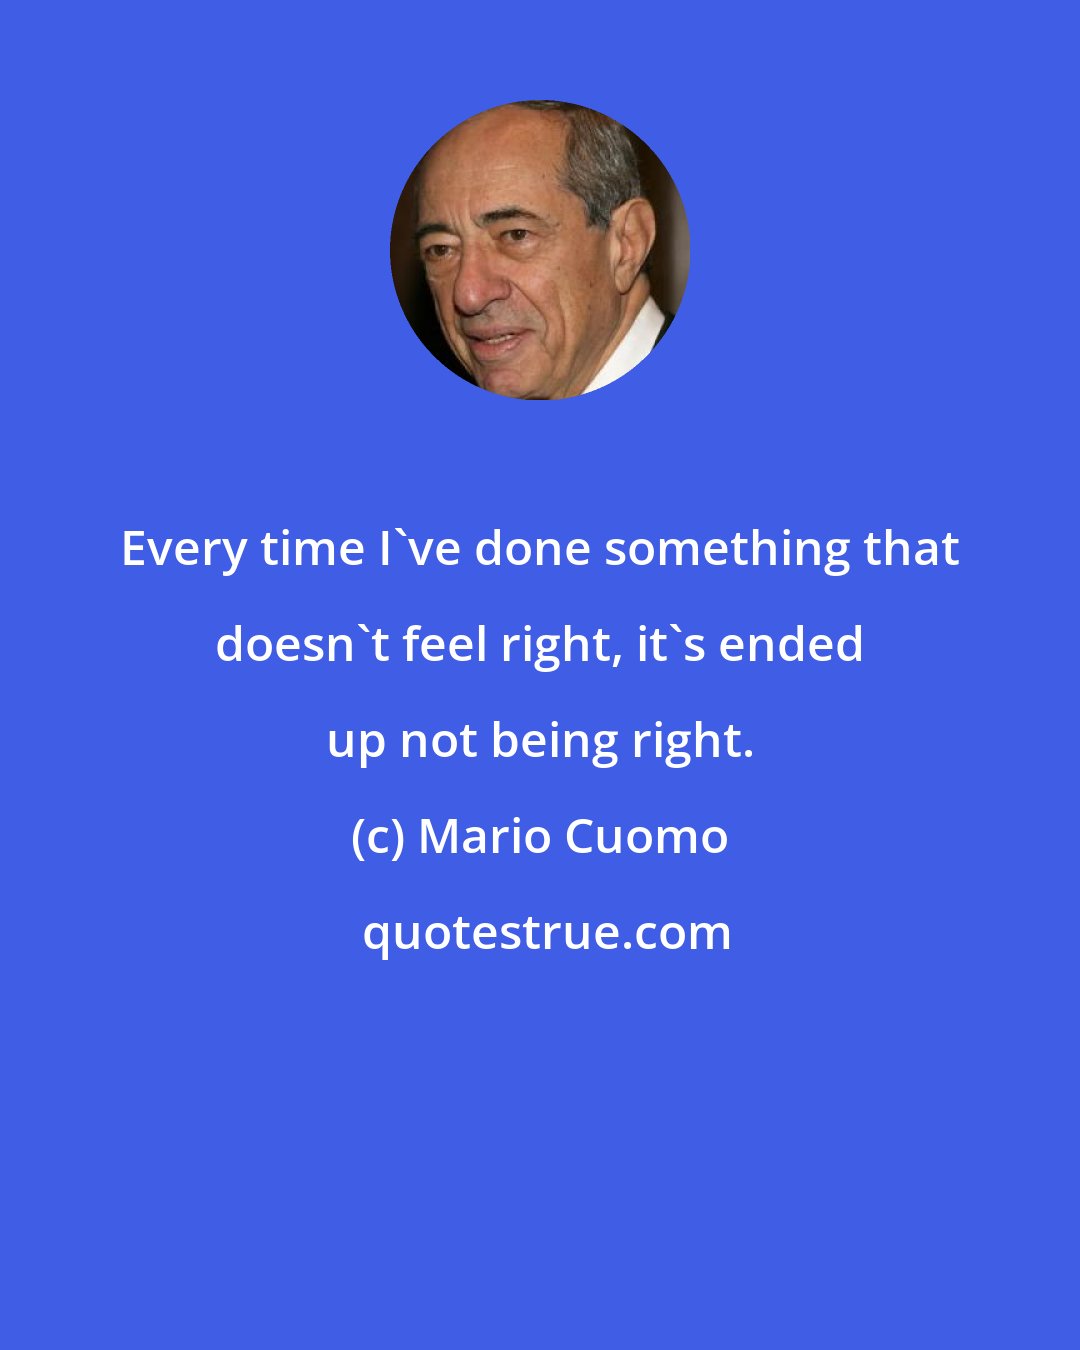 Mario Cuomo: Every time I've done something that doesn't feel right, it's ended up not being right.